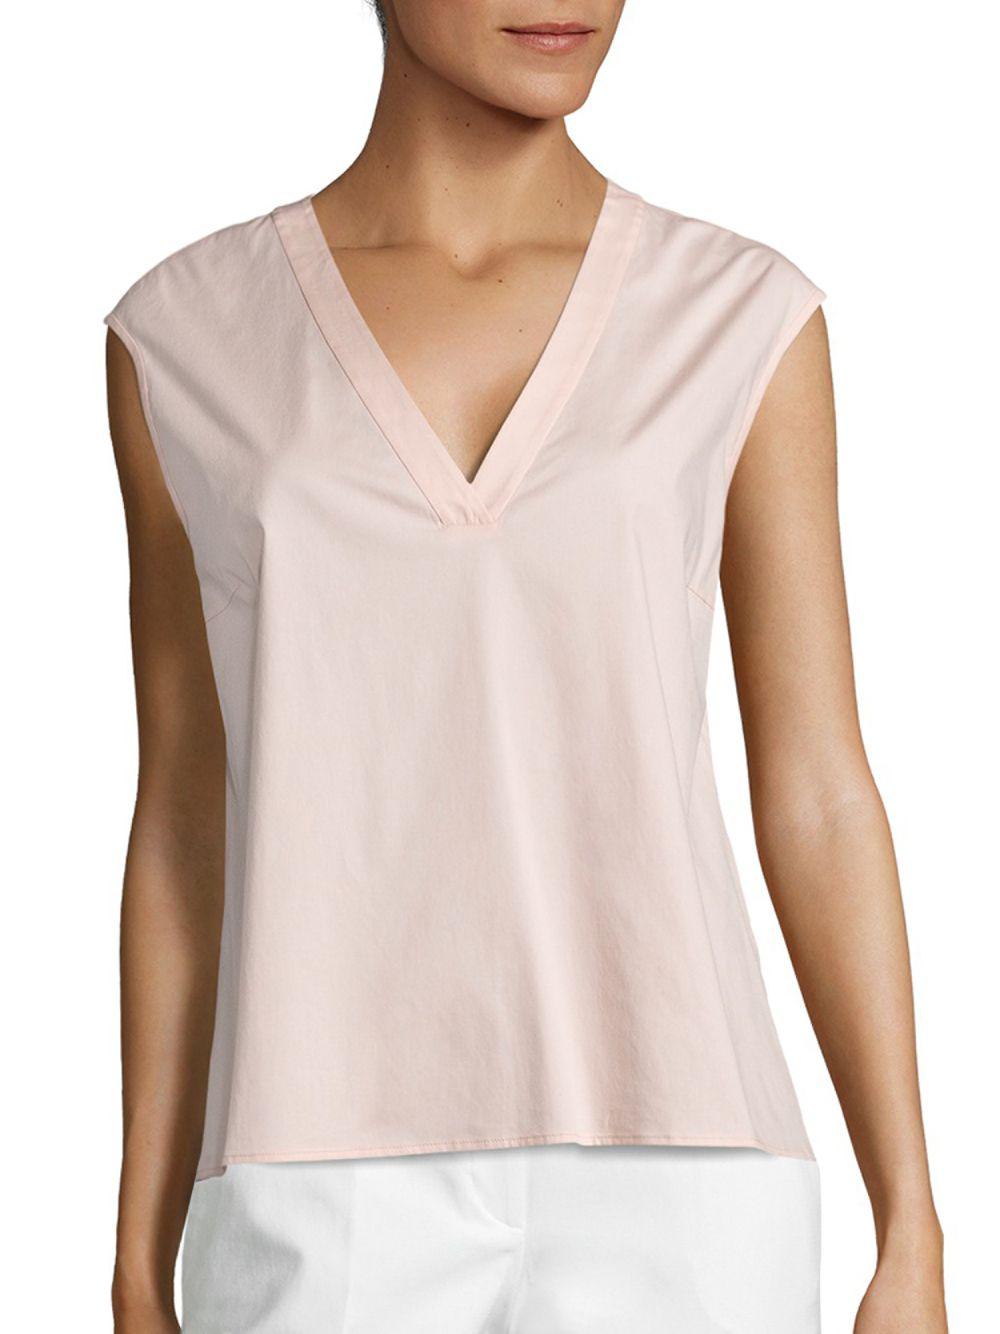 Peserico Cotton Sleeveless V-neck Blouse in Soft Pink (Pink) - Lyst